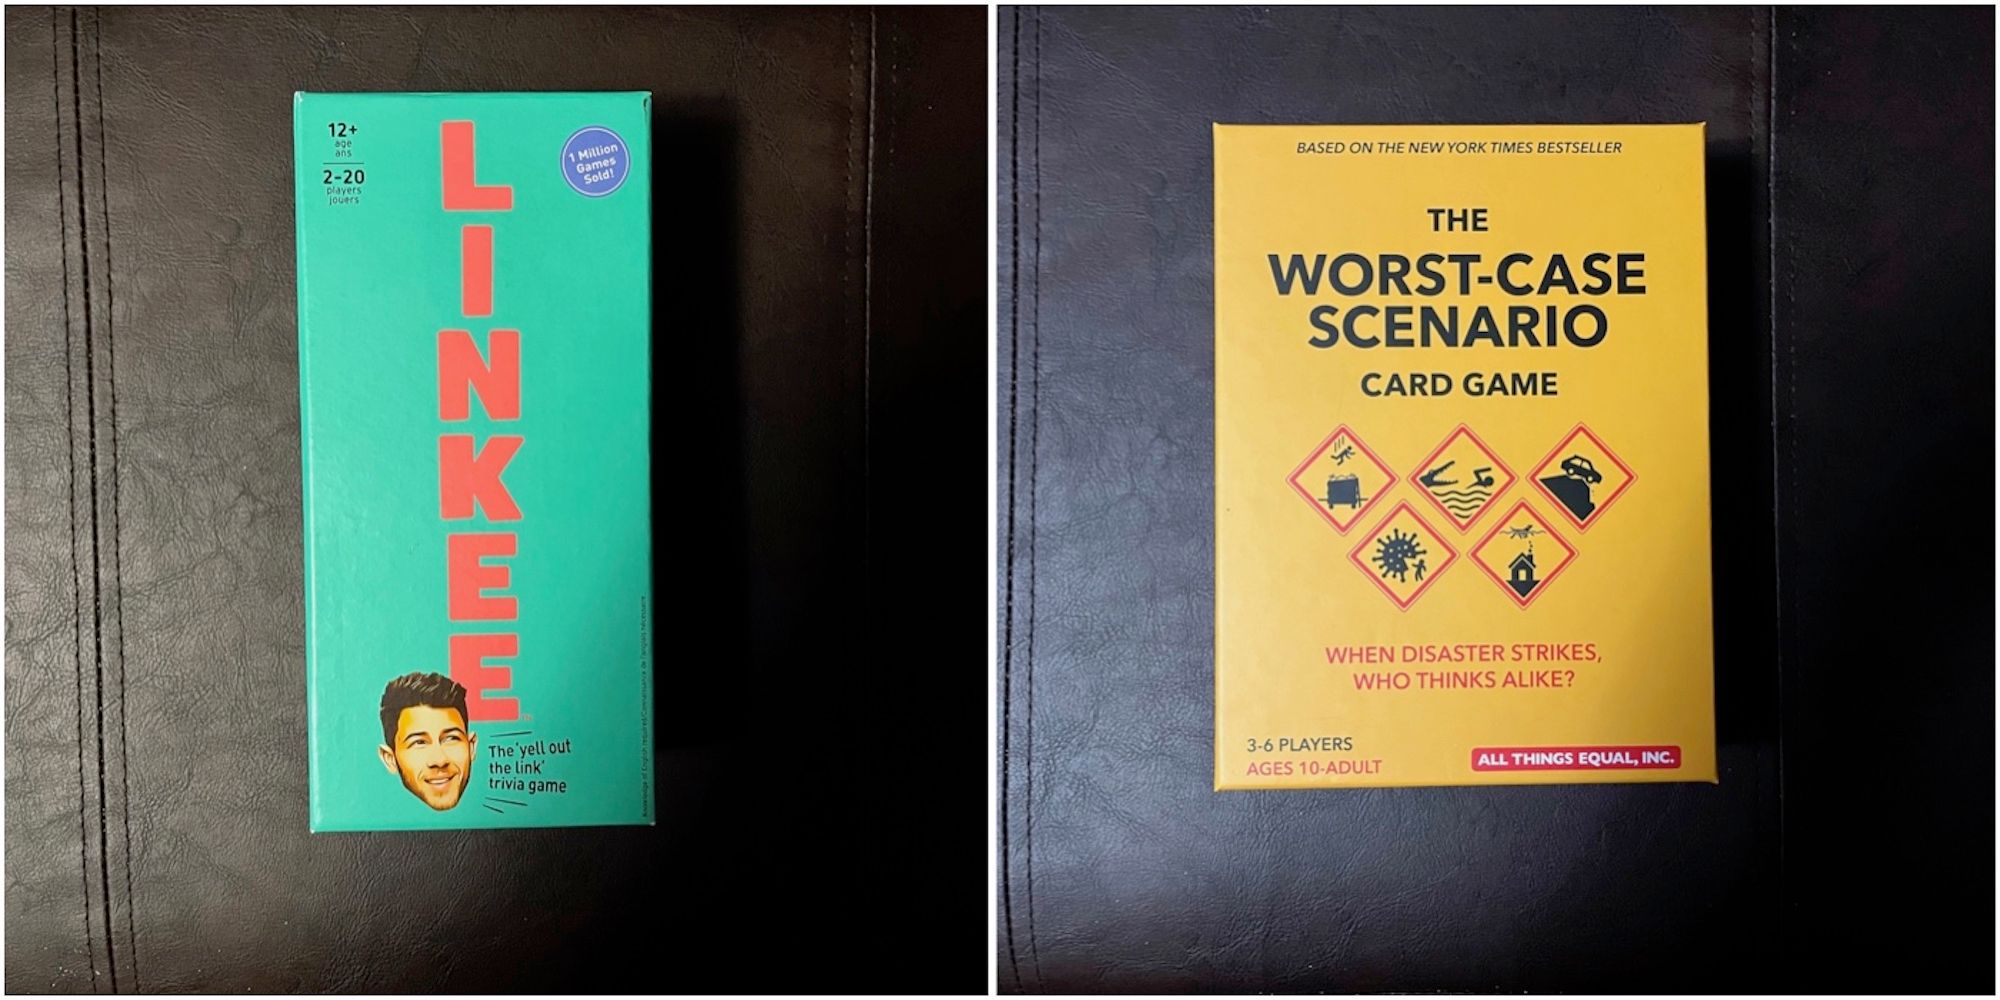 The board game boxes for Linkee and The Worst Case Scenario